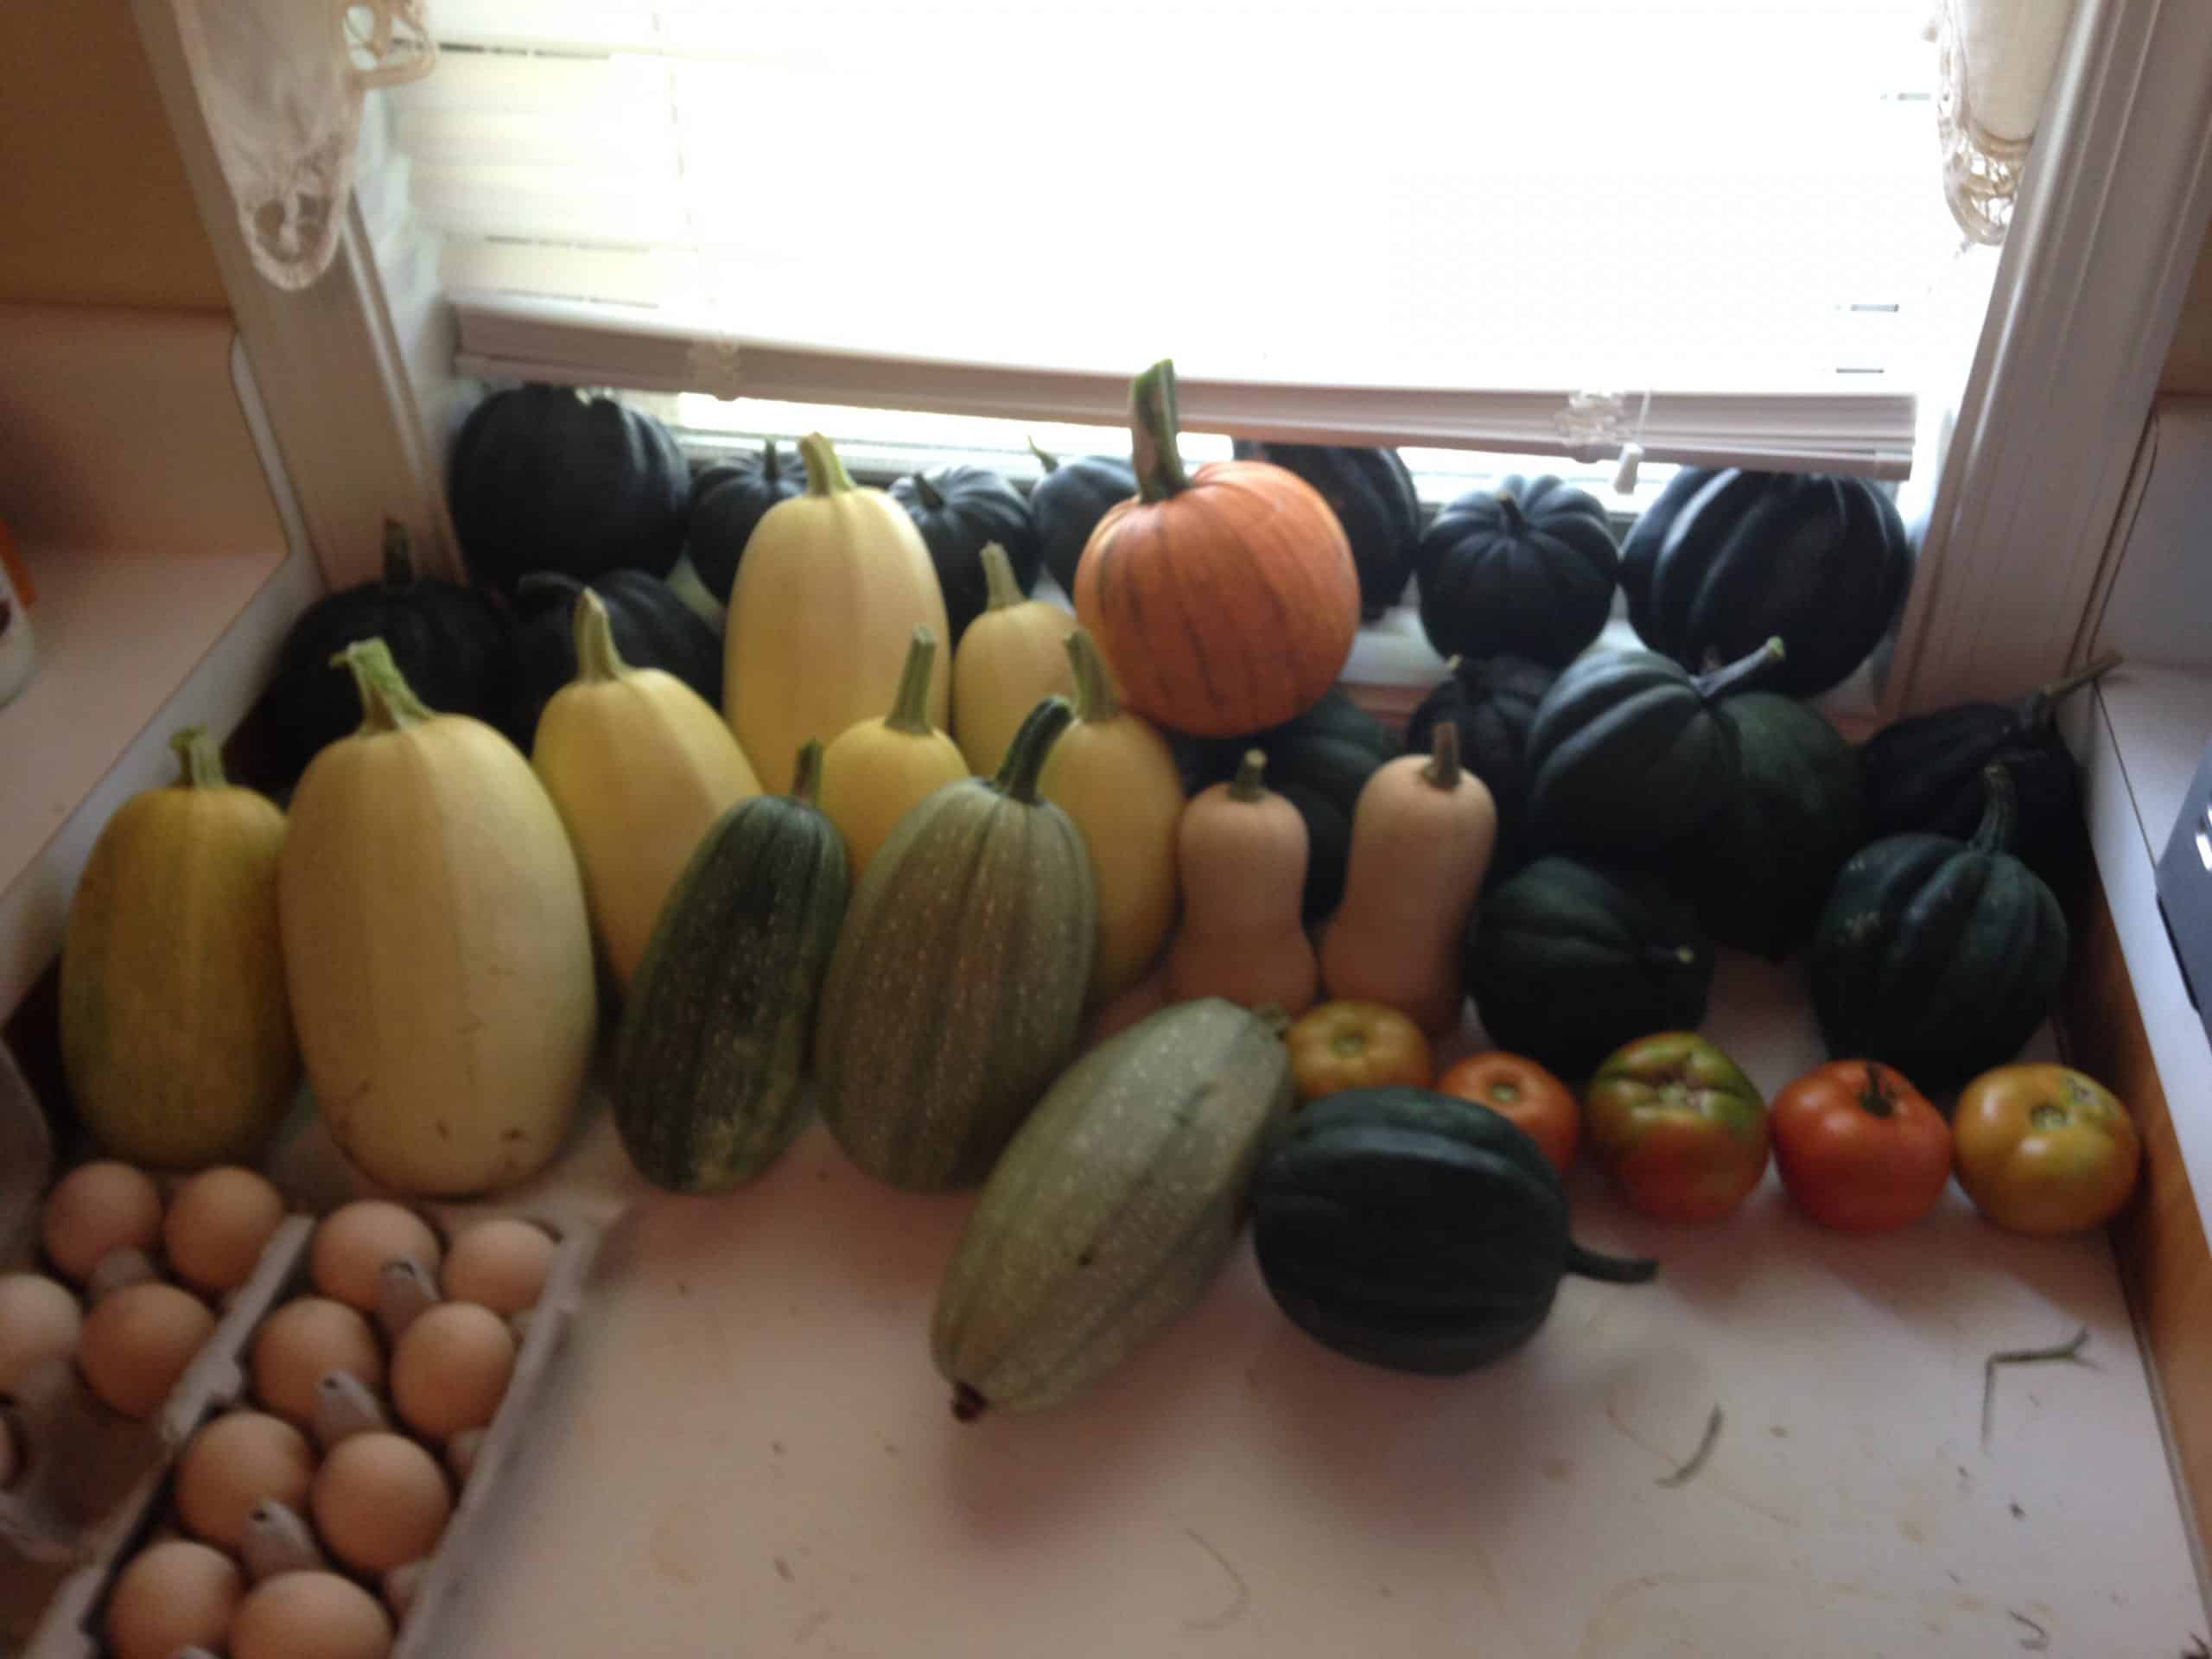 several gourds and winter squash